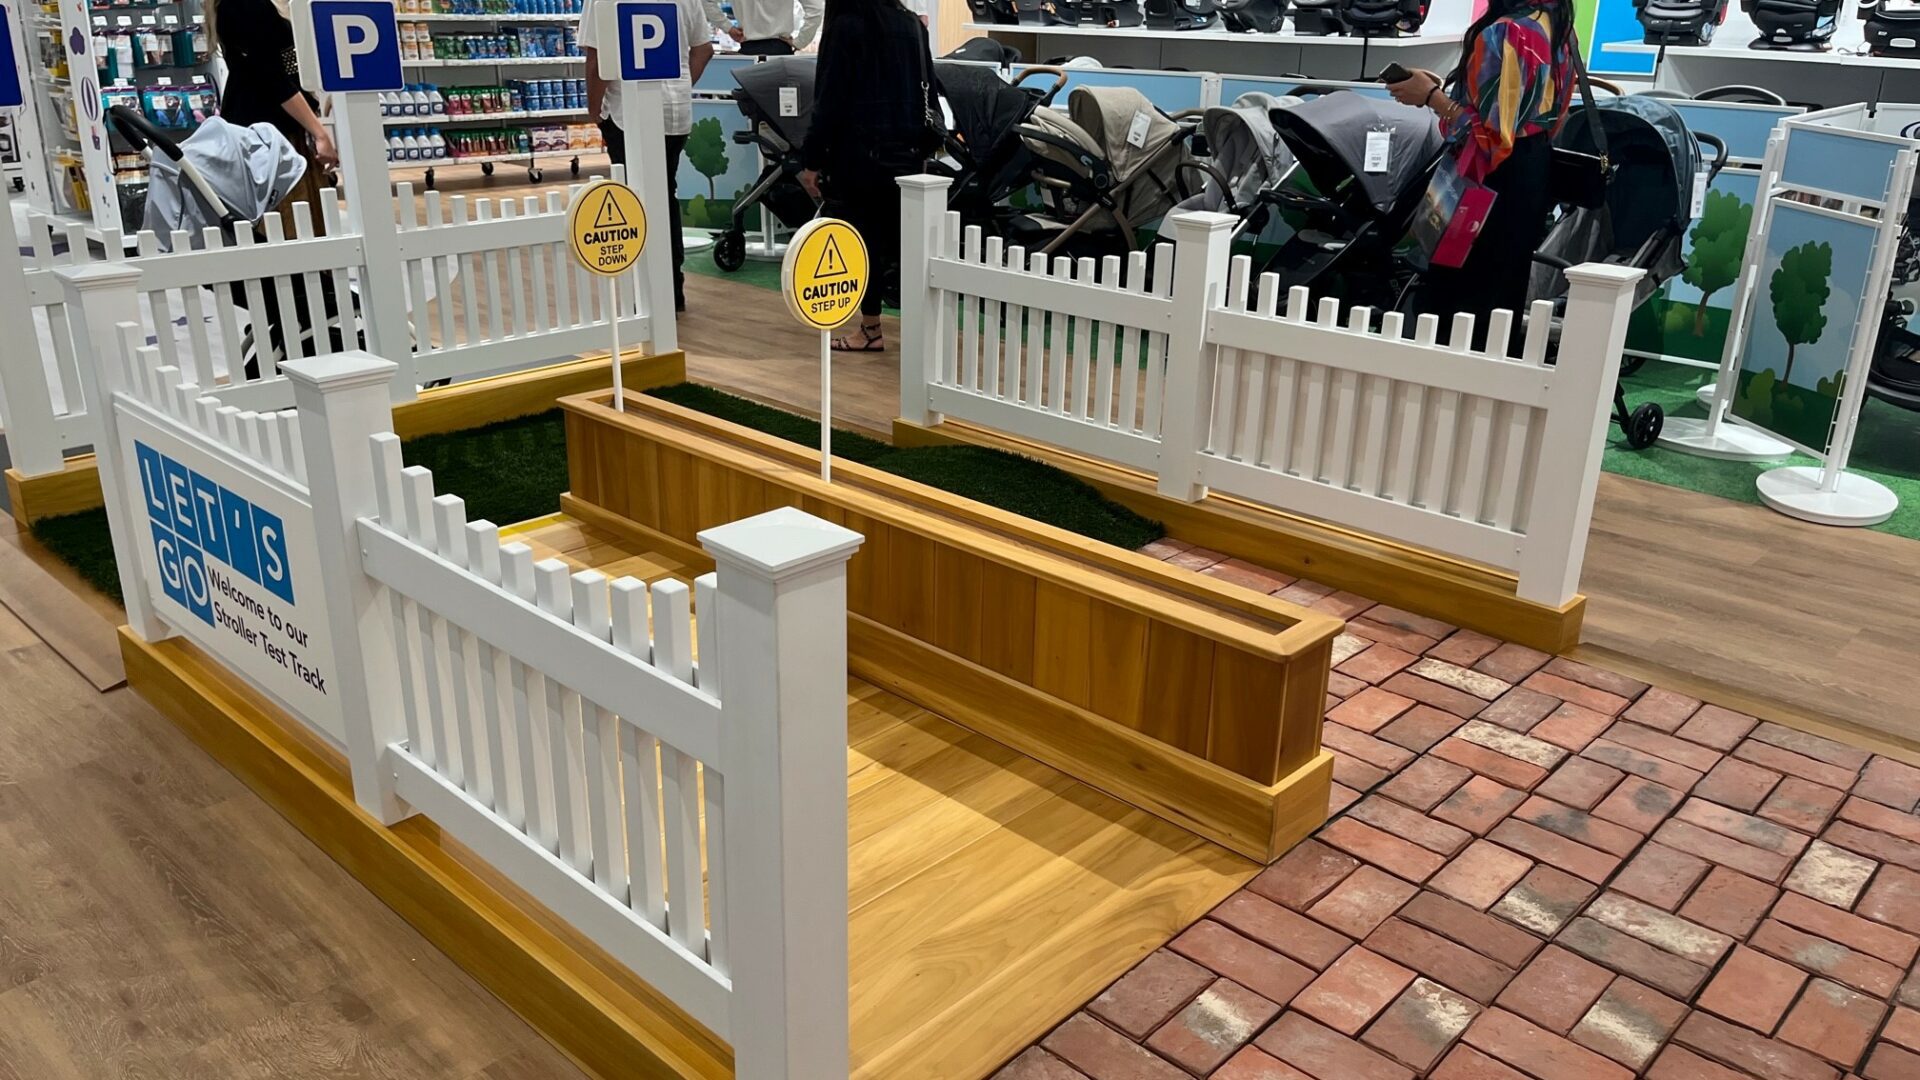 The stroller test track. (Photo Credit: Retail TouchPoints)